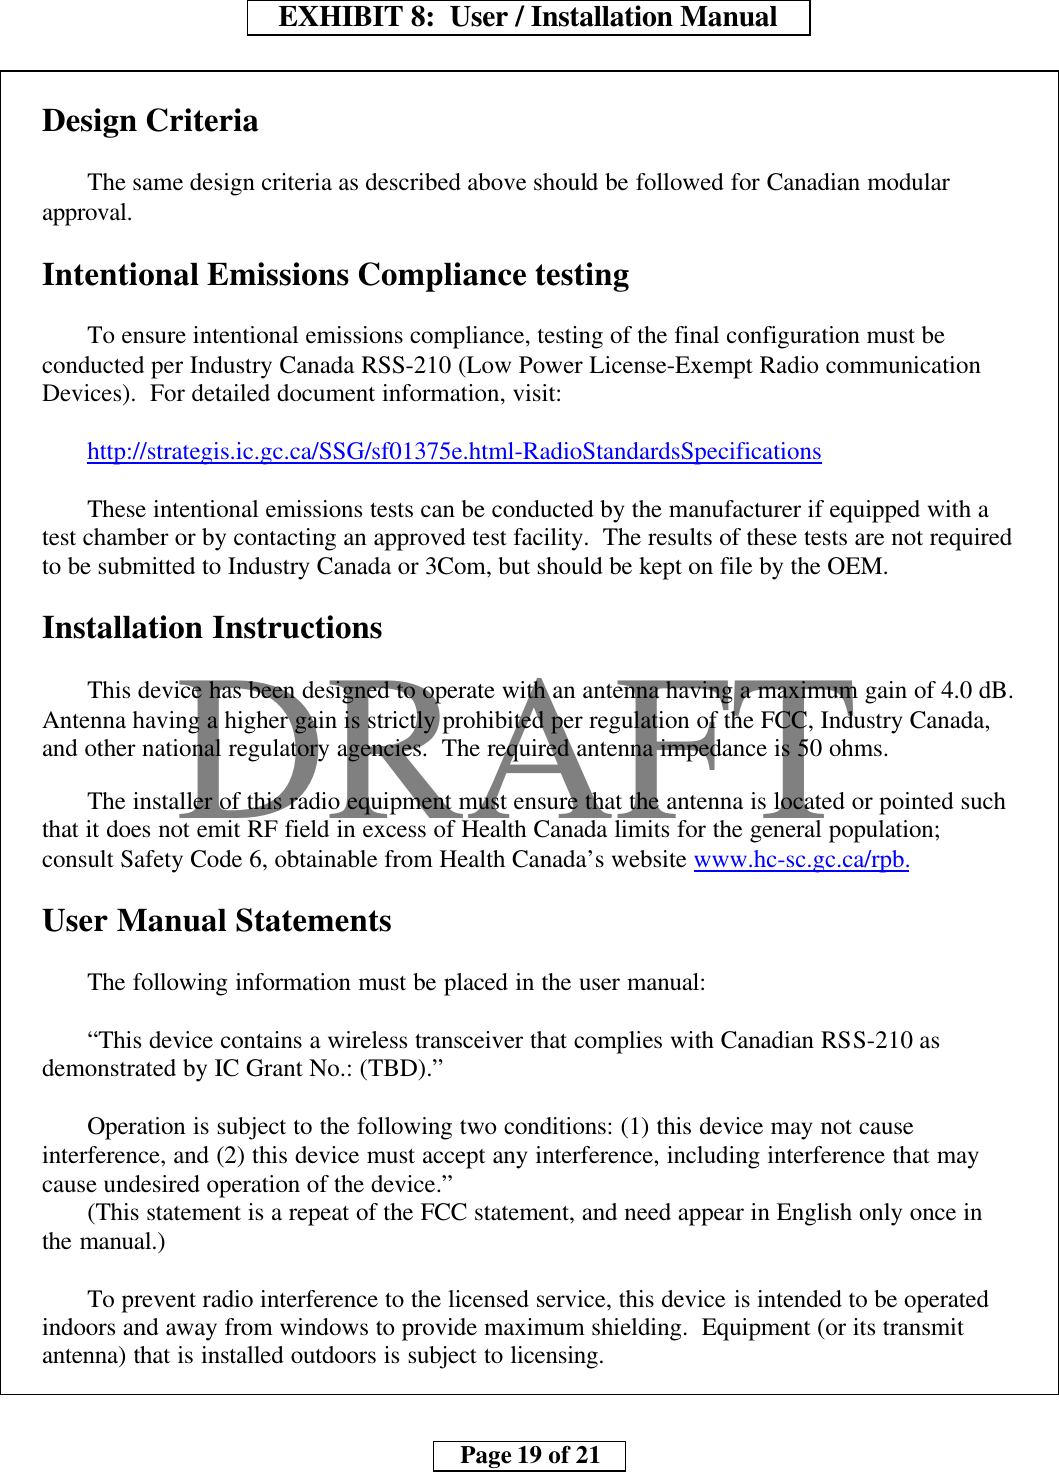     EXHIBIT 8:  User / Installation Manual        Page 19 of 21    DRAFTDesign CriteriaThe same design criteria as described above should be followed for Canadian modularapproval.Intentional Emissions Compliance testingTo ensure intentional emissions compliance, testing of the final configuration must beconducted per Industry Canada RSS-210 (Low Power License-Exempt Radio communicationDevices).  For detailed document information, visit:http://strategis.ic.gc.ca/SSG/sf01375e.html-RadioStandardsSpecificationsThese intentional emissions tests can be conducted by the manufacturer if equipped with atest chamber or by contacting an approved test facility.  The results of these tests are not requiredto be submitted to Industry Canada or 3Com, but should be kept on file by the OEM.Installation InstructionsThis device has been designed to operate with an antenna having a maximum gain of 4.0 dB.Antenna having a higher gain is strictly prohibited per regulation of the FCC, Industry Canada,and other national regulatory agencies.  The required antenna impedance is 50 ohms.The installer of this radio equipment must ensure that the antenna is located or pointed suchthat it does not emit RF field in excess of Health Canada limits for the general population;consult Safety Code 6, obtainable from Health Canada’s website www.hc-sc.gc.ca/rpb.User Manual StatementsThe following information must be placed in the user manual:“This device contains a wireless transceiver that complies with Canadian RSS-210 asdemonstrated by IC Grant No.: (TBD).”Operation is subject to the following two conditions: (1) this device may not causeinterference, and (2) this device must accept any interference, including interference that maycause undesired operation of the device.”(This statement is a repeat of the FCC statement, and need appear in English only once inthe manual.)To prevent radio interference to the licensed service, this device is intended to be operatedindoors and away from windows to provide maximum shielding.  Equipment (or its transmitantenna) that is installed outdoors is subject to licensing.